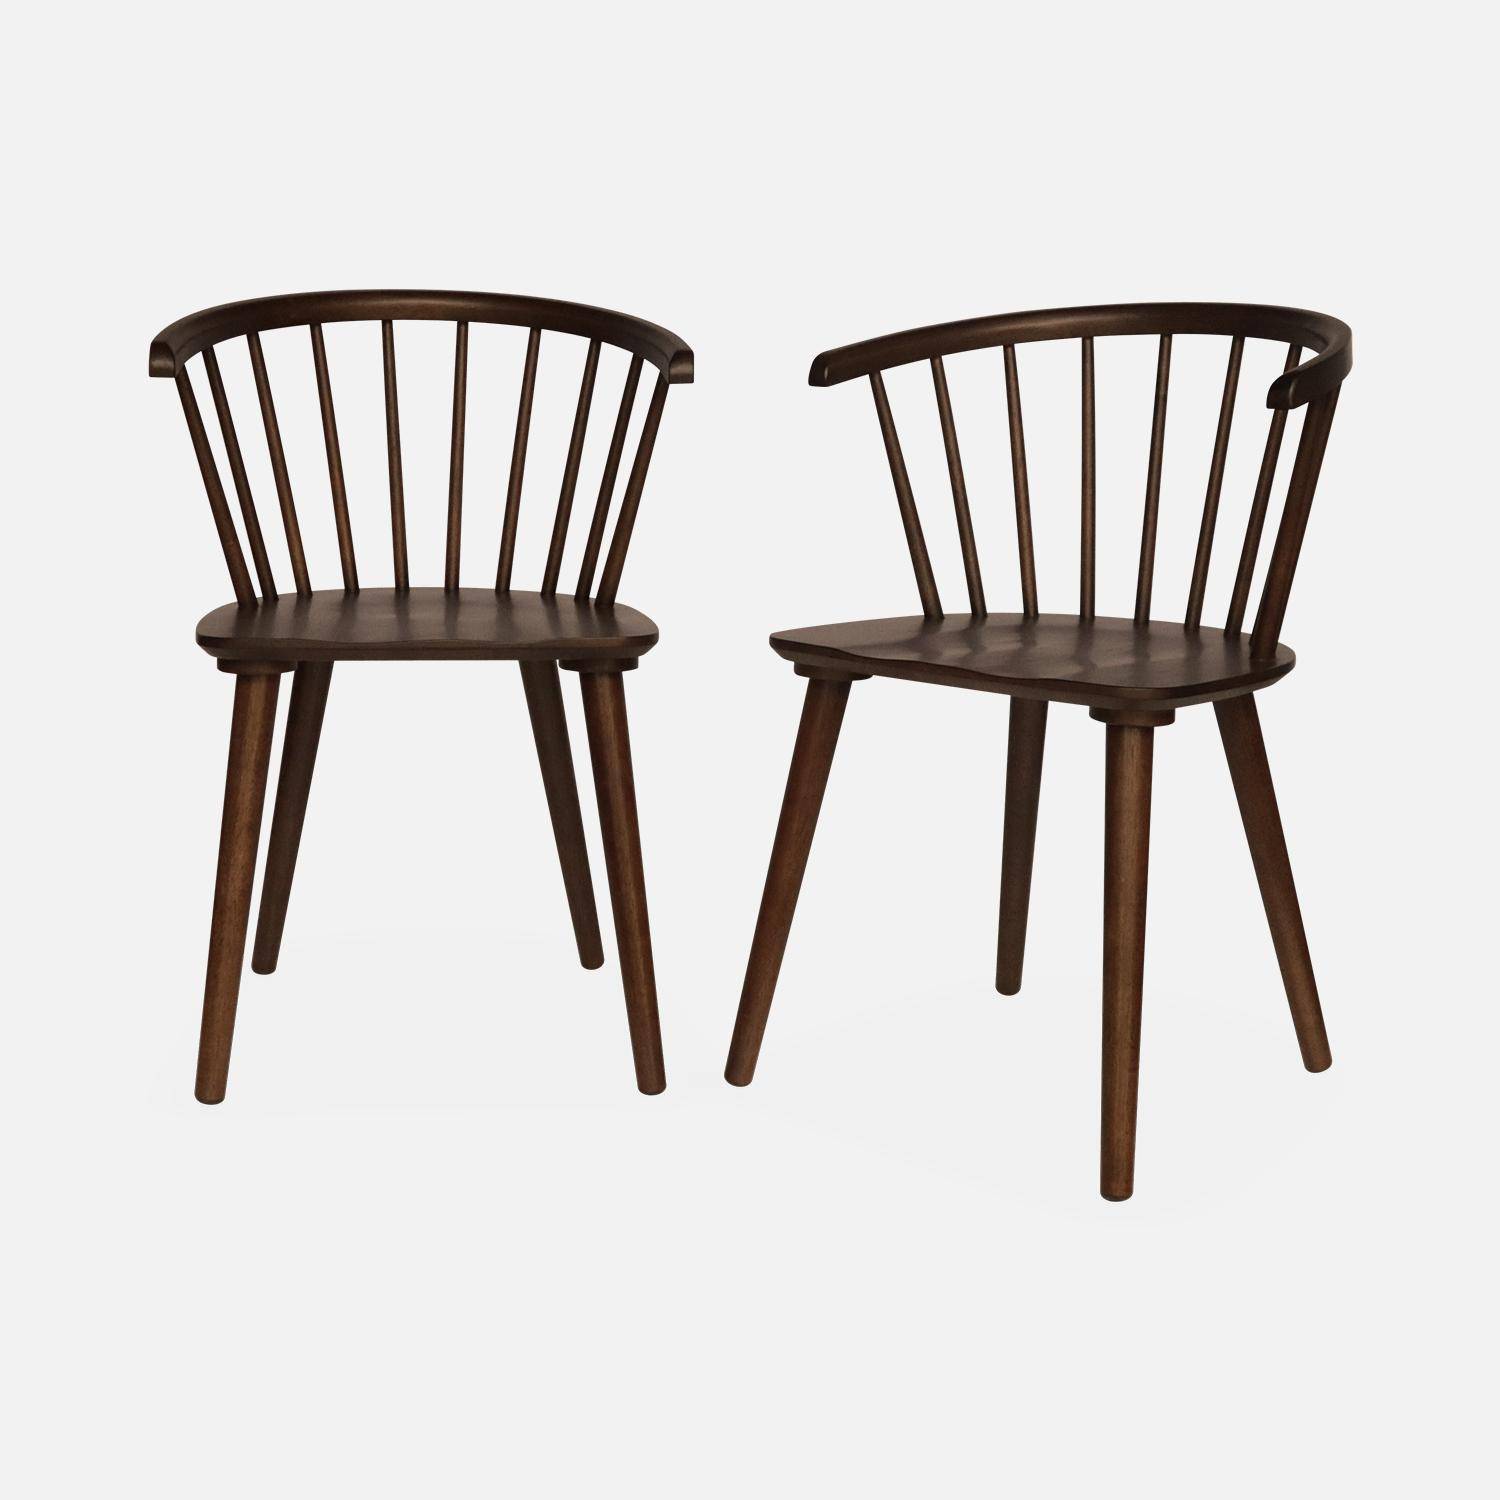 Pair of Wood and Plywood Spindle Chairs, dark wood, L53 x W47.5 x H76cm Photo3